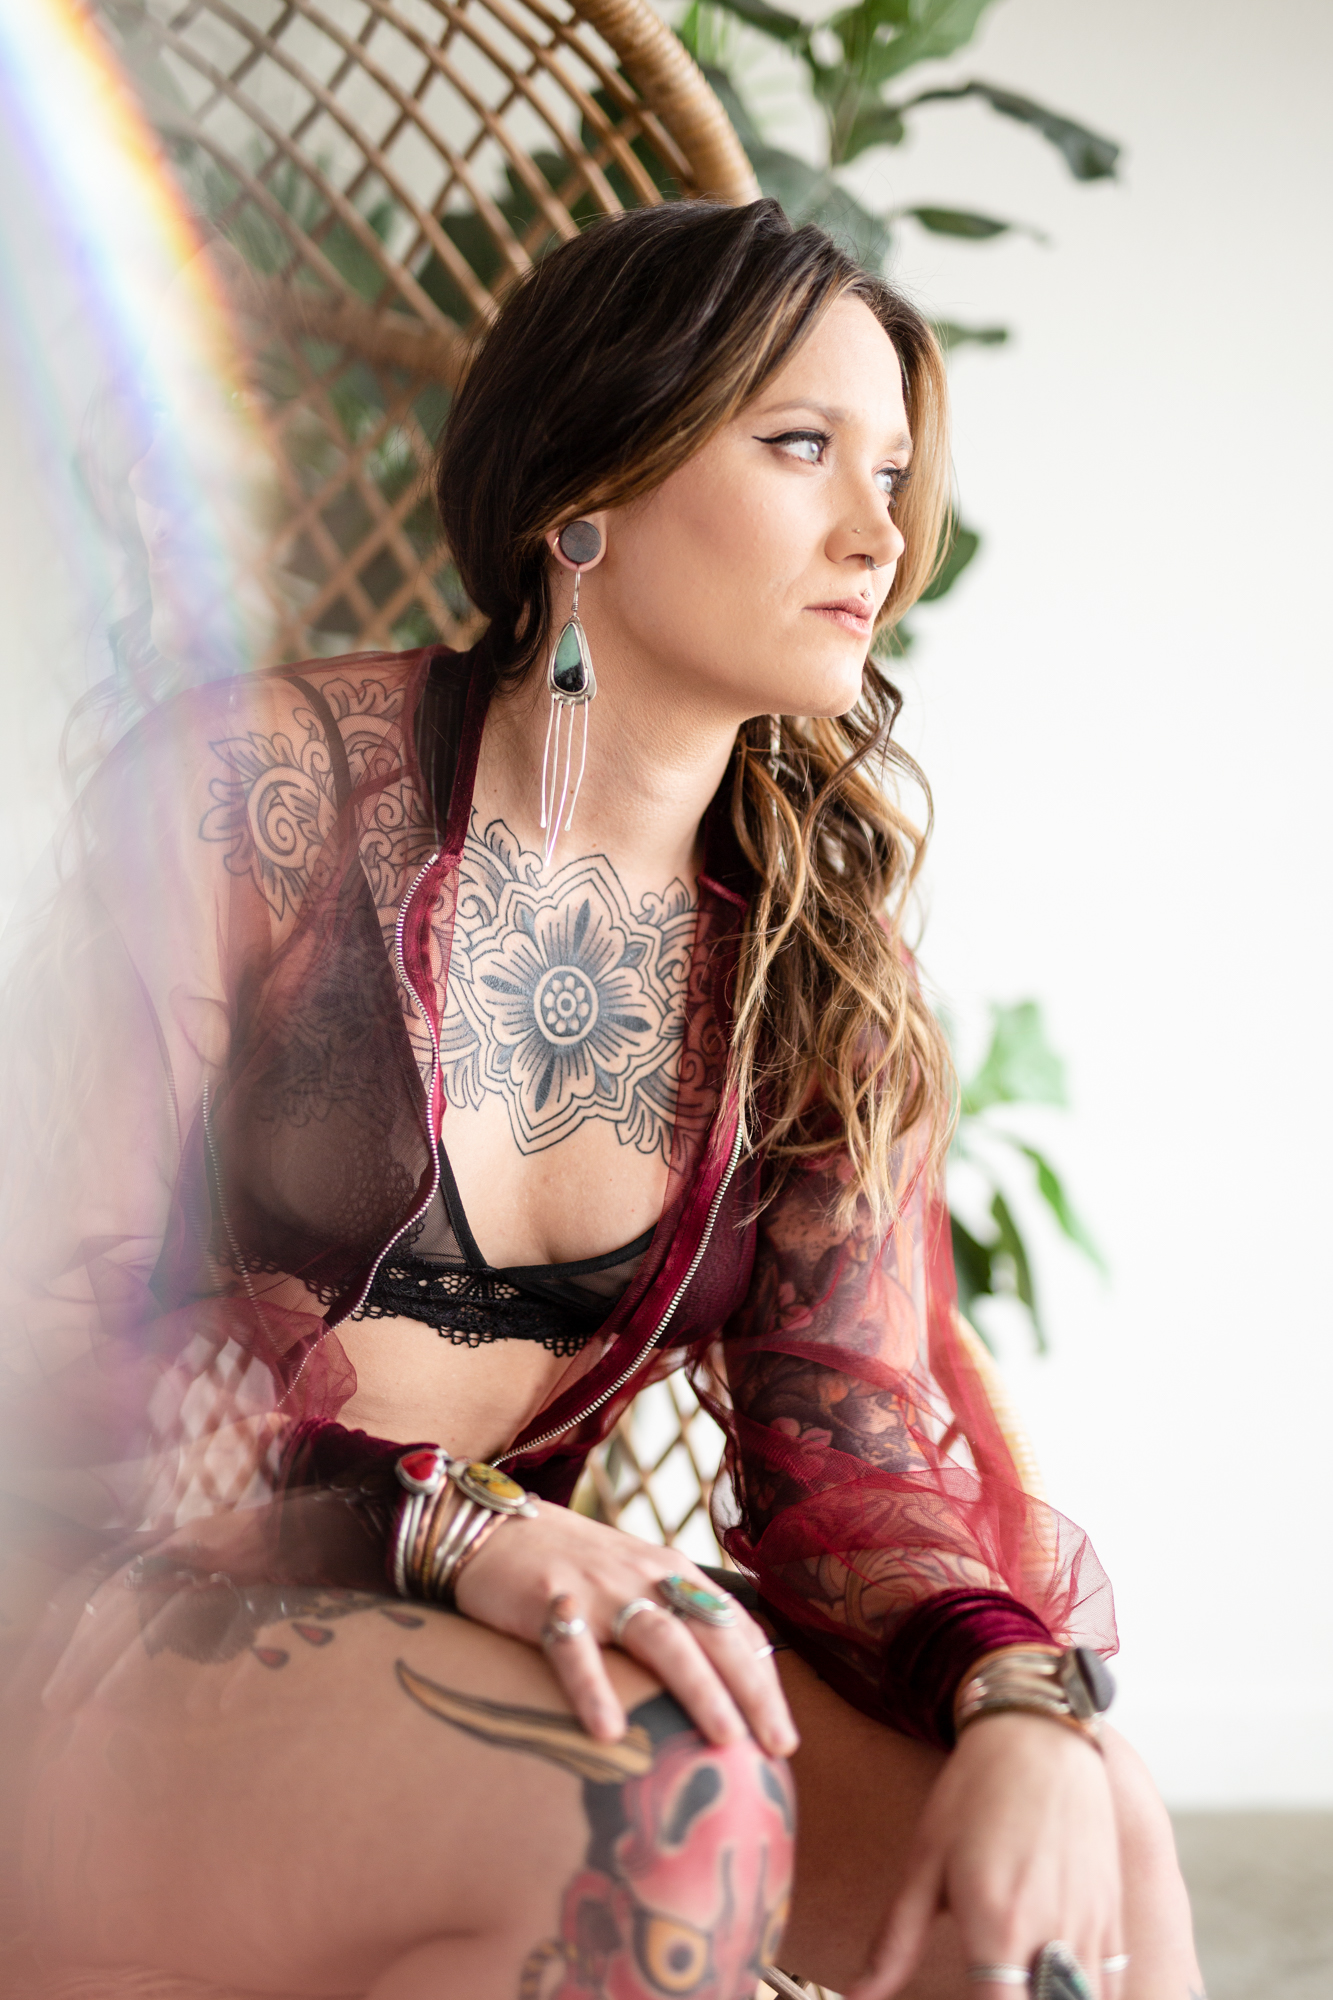 https://lilacandfernphotography.com/wp-content/uploads/2022/03/Boudoir-Fort-Collins-Colorado-Lilac-and-Fern-LS-24.jpg